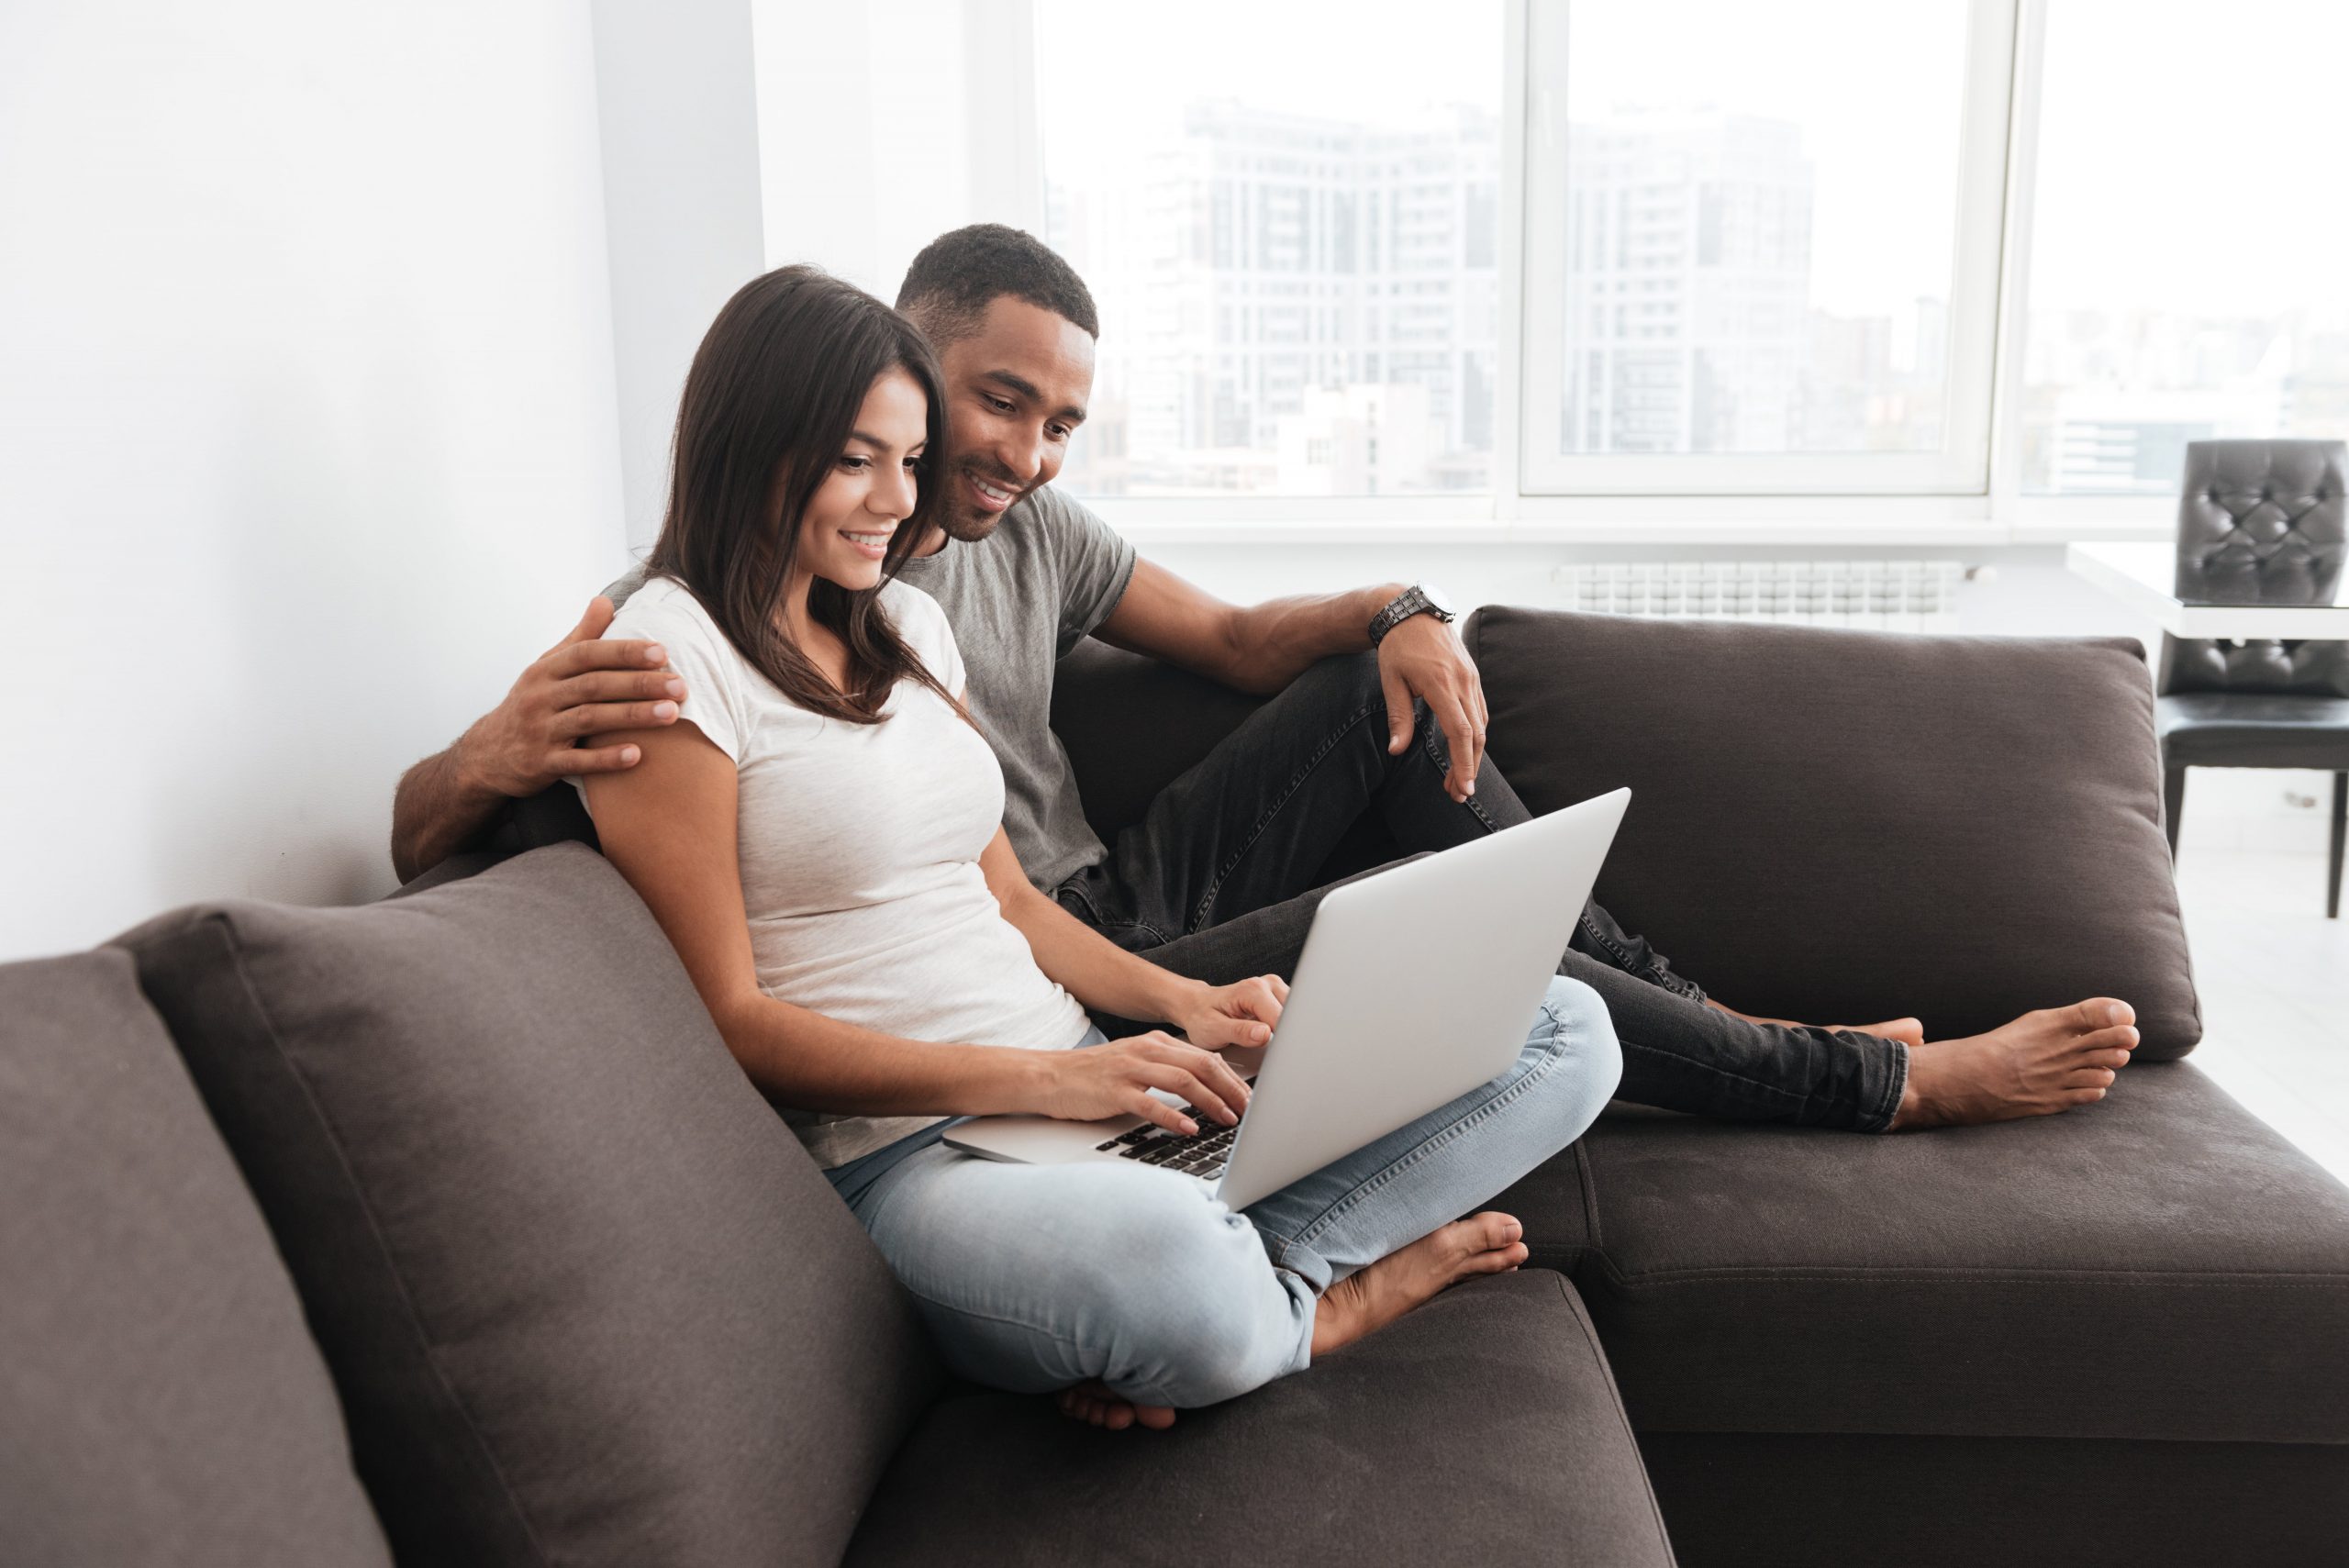 Young couple smiling and looking at a laptop while sitting on a couch